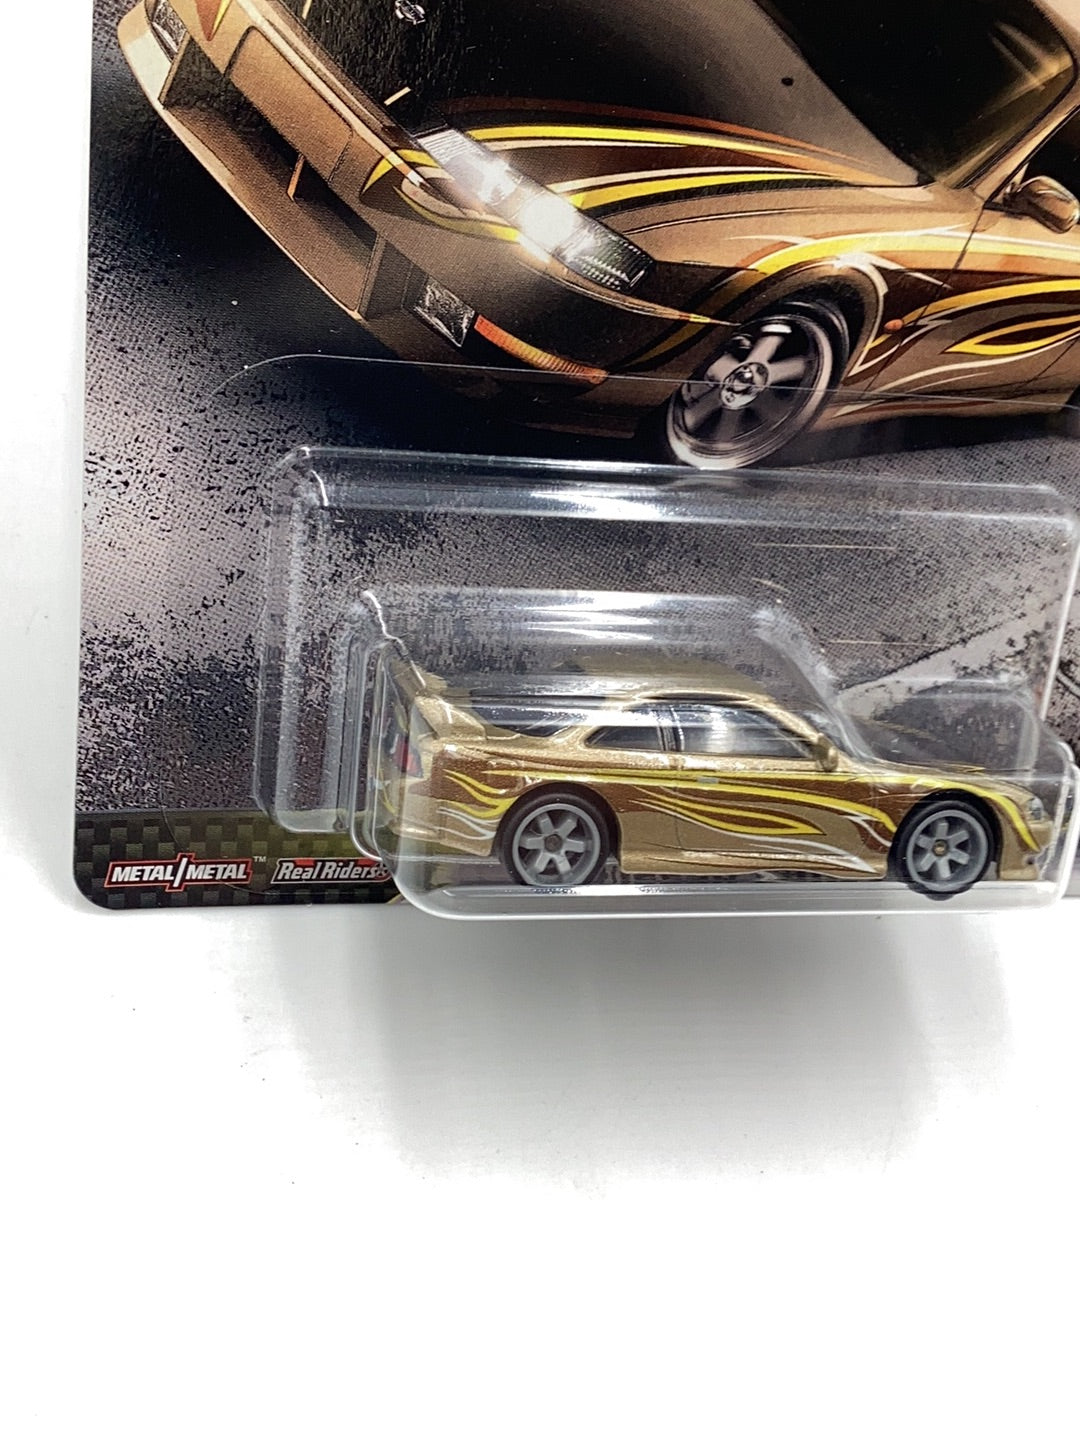 Hot Wheels premium fast and furious Fast Tuners #3 Nissan 240SX S14 246K